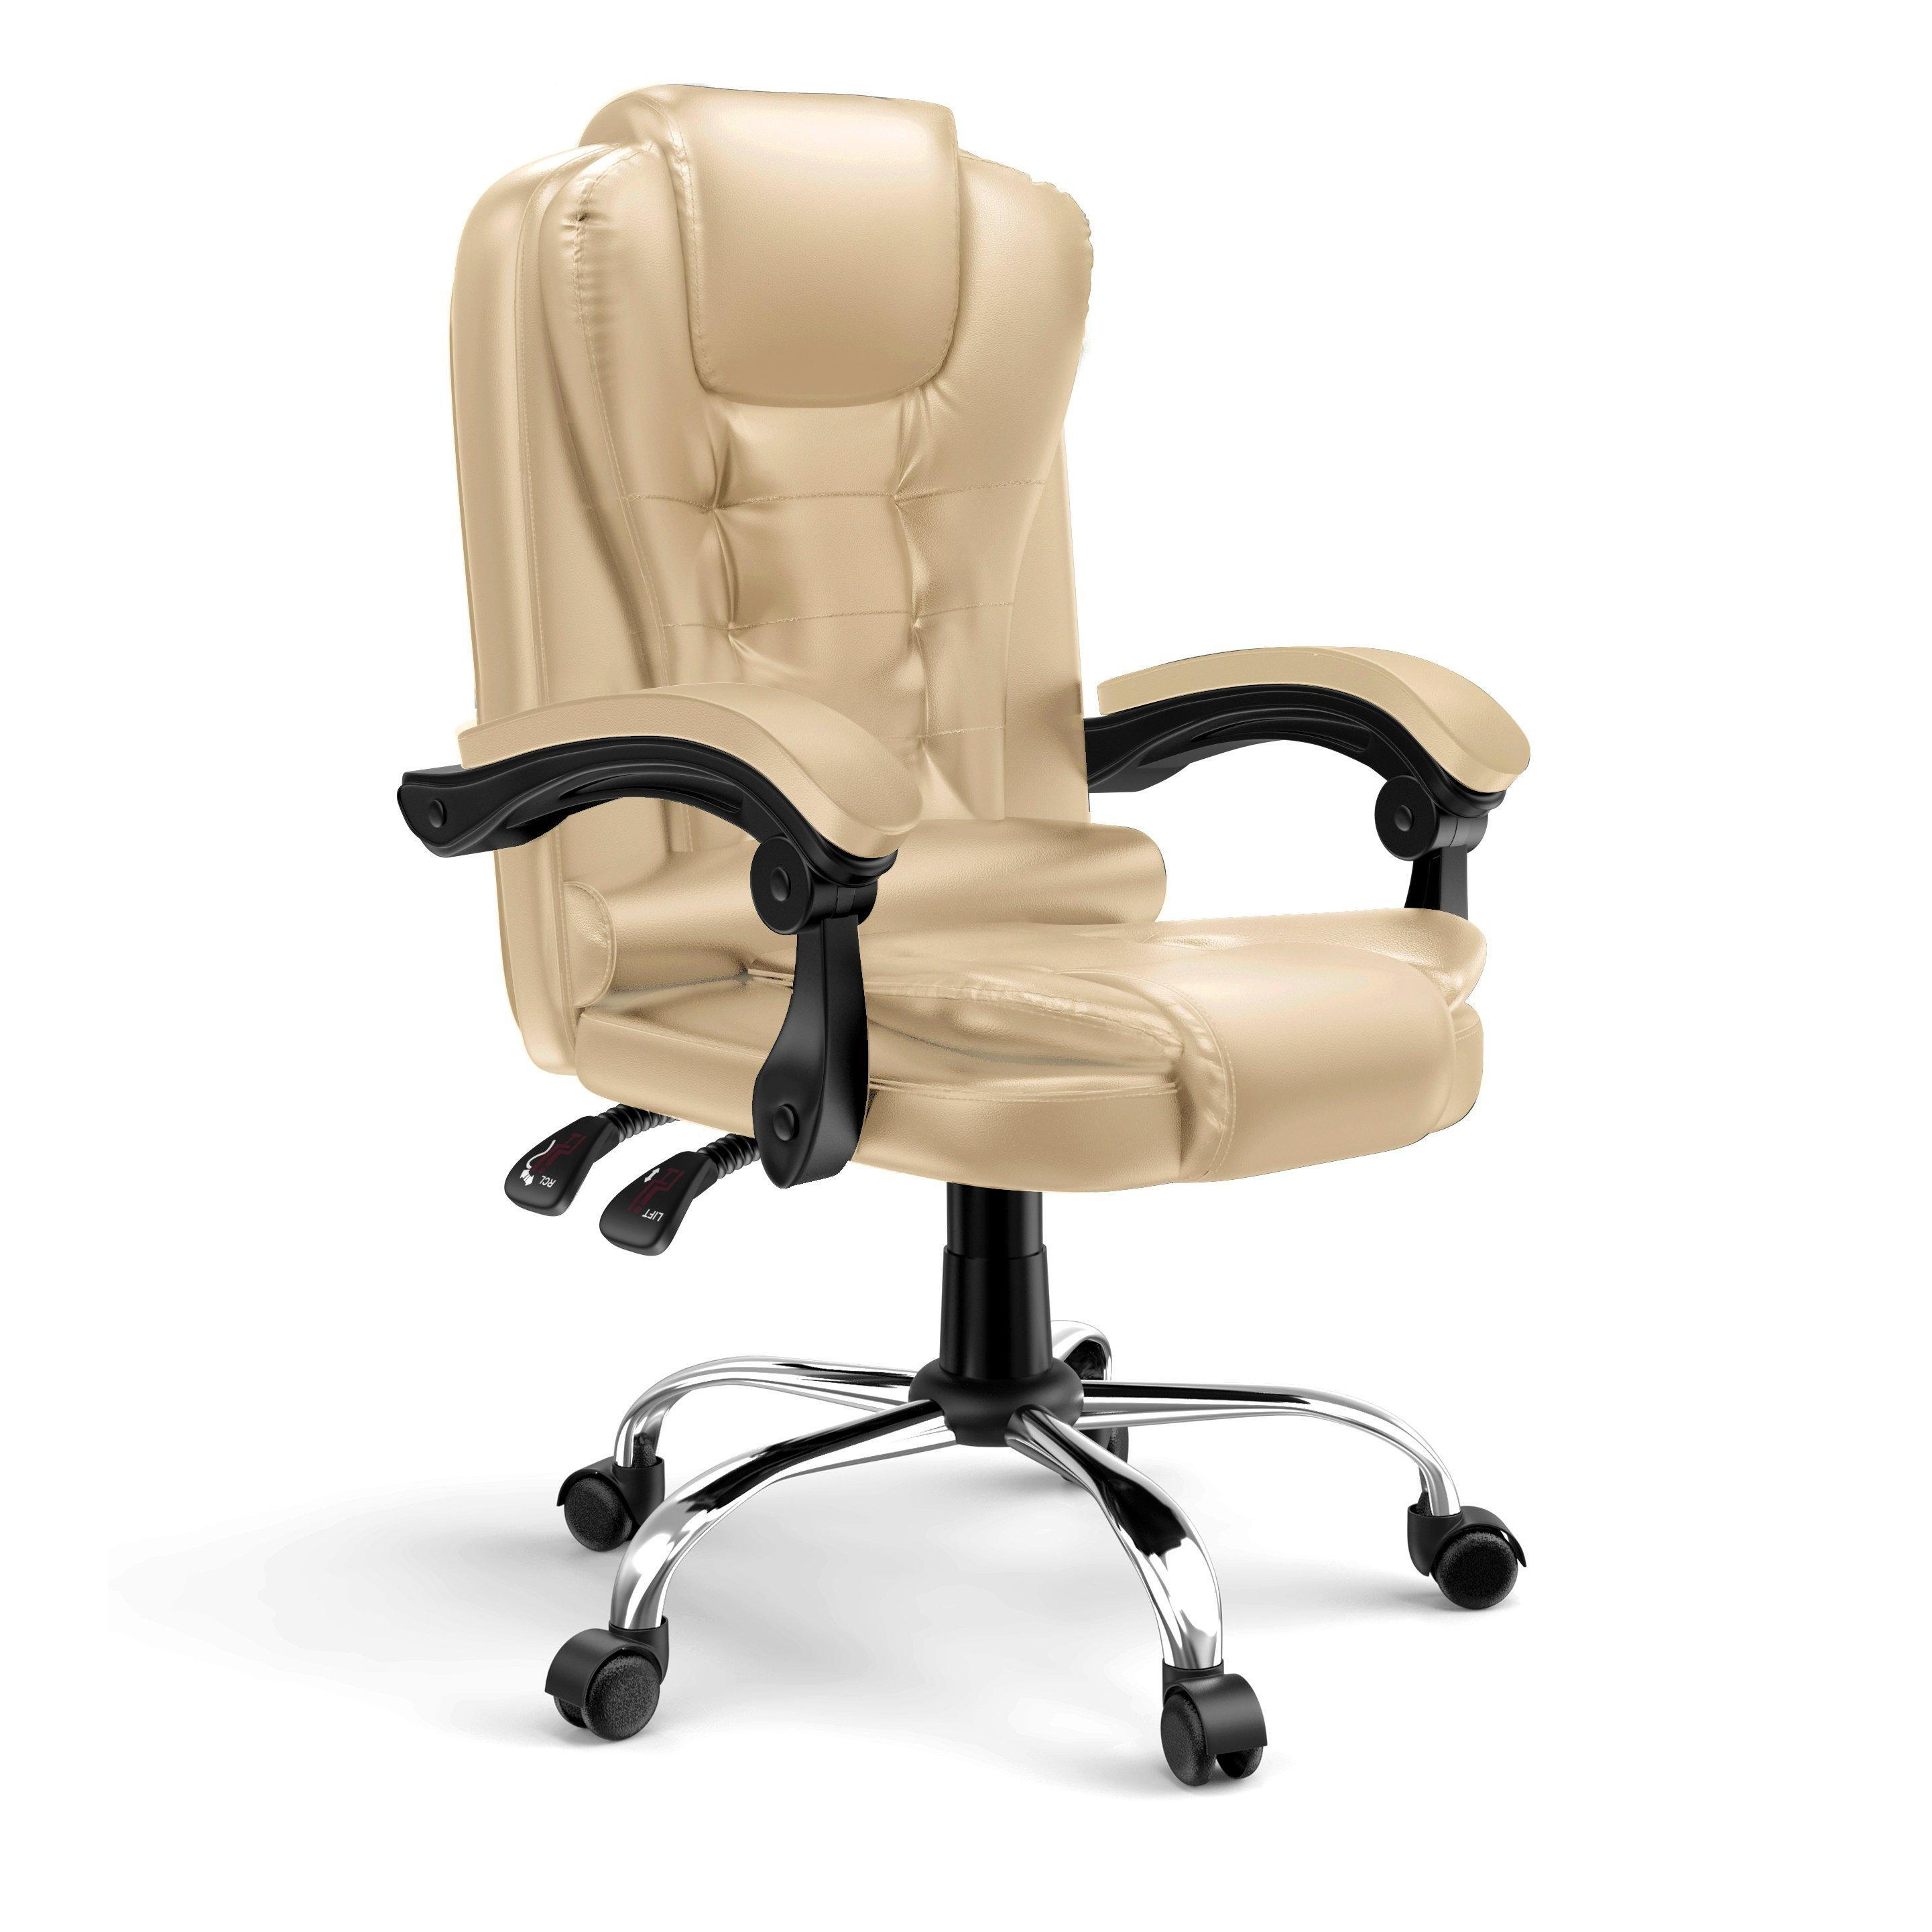 Premium Ergonomic Recliner Office Chair - Tailored Comfort for Home Office Productivity - image 1